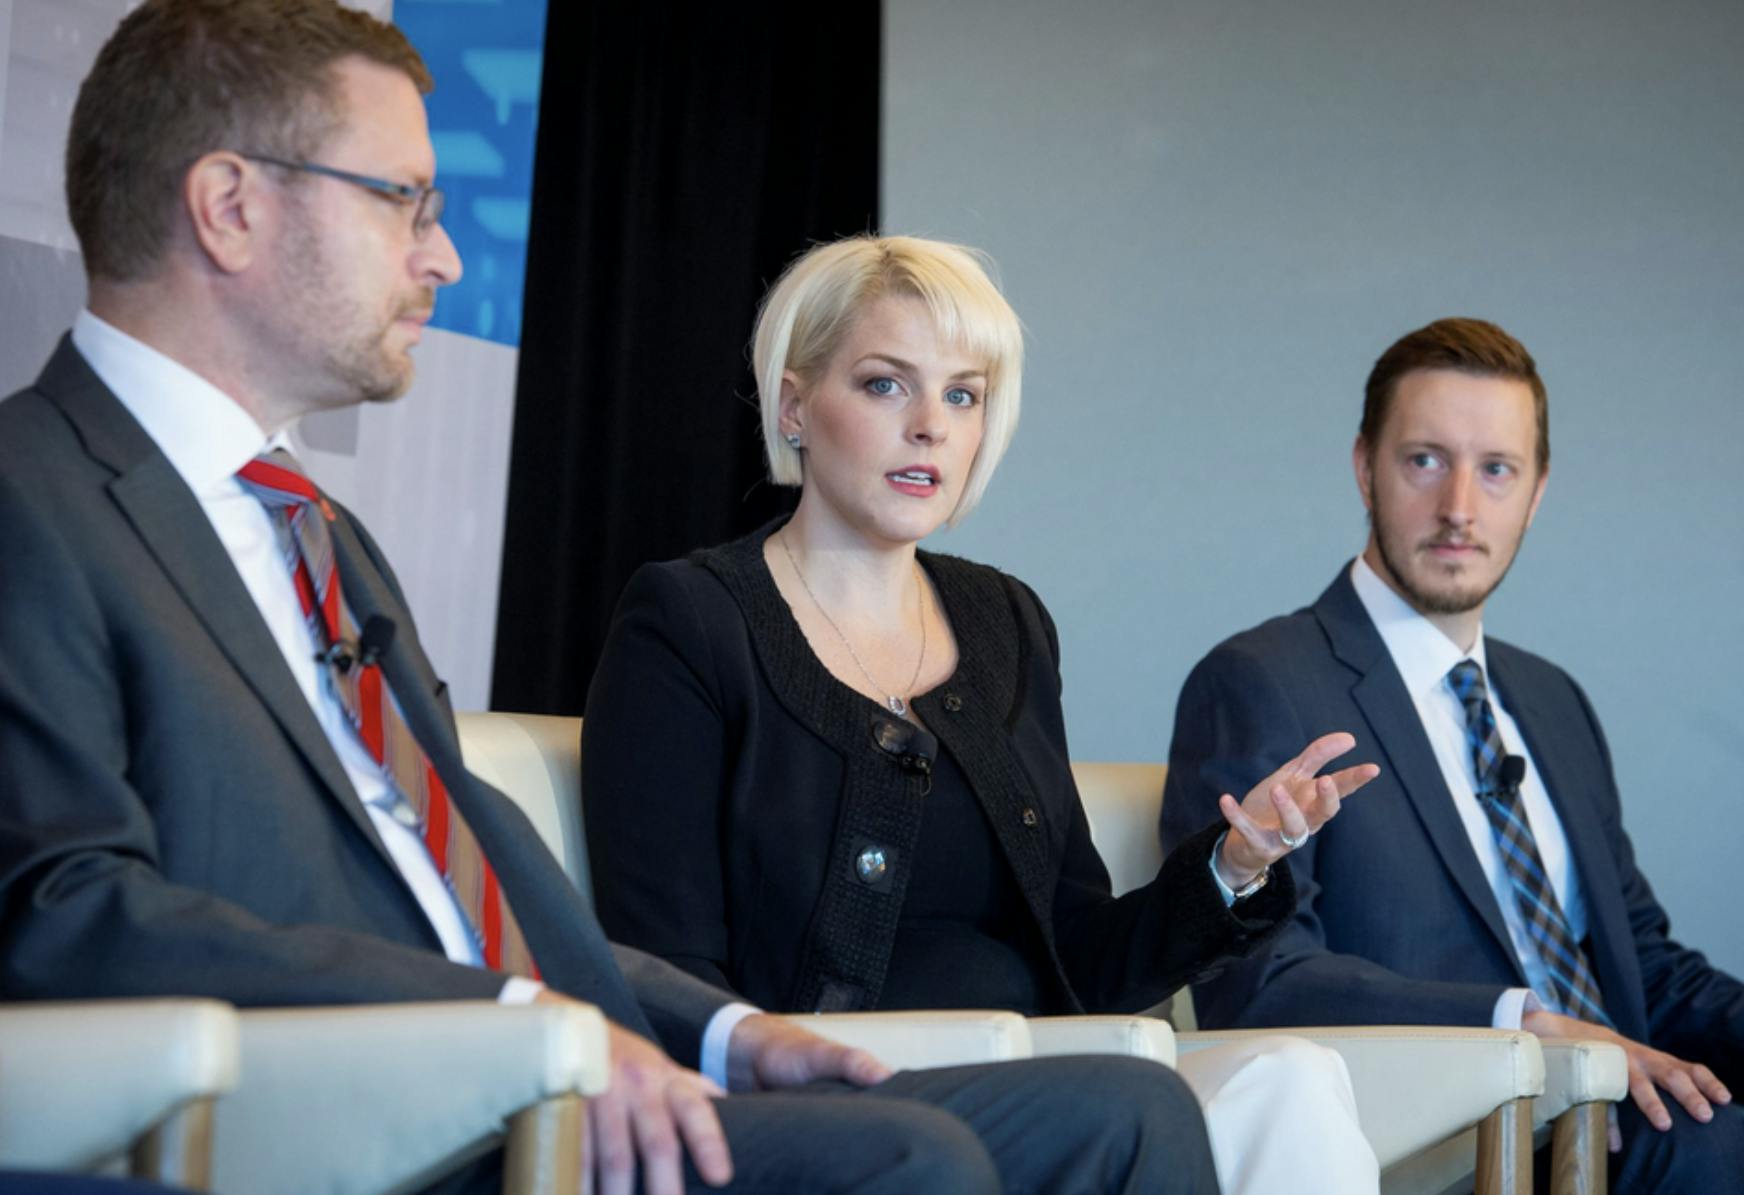 Image of a woman talking and sitting between two men. Related to: Modernized Cloud Infrastructure, Advanced Data Capabilities, agencies and ai automation, data analytics projects, hybrid cloud tools.